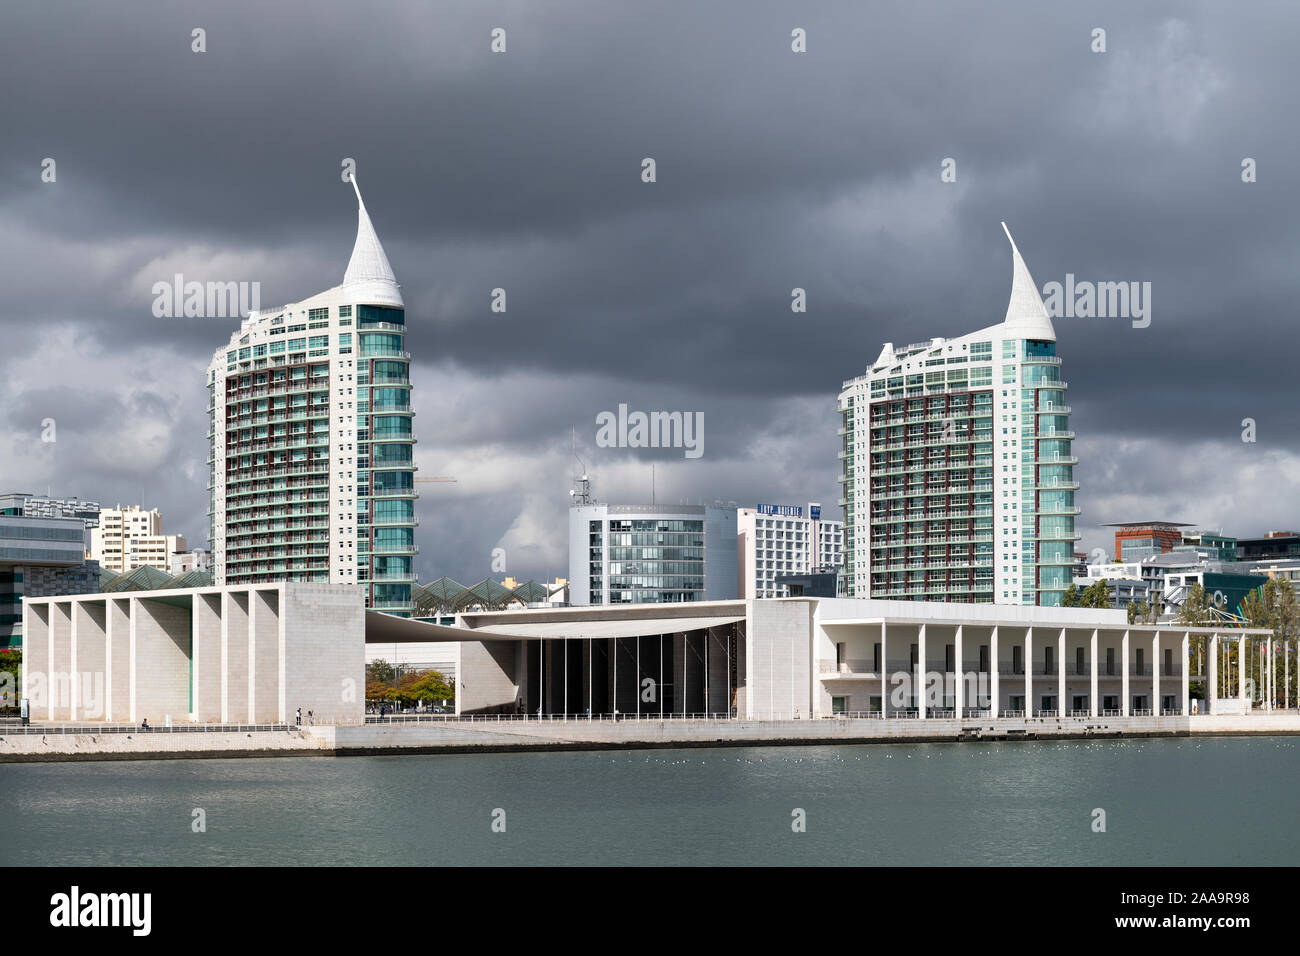 Lisbon, Portugal - October 13, 2019: The skyline of the city of Lisbon at the Park of Nations (Parque das Nacoes), in Portugal. Stock Photo